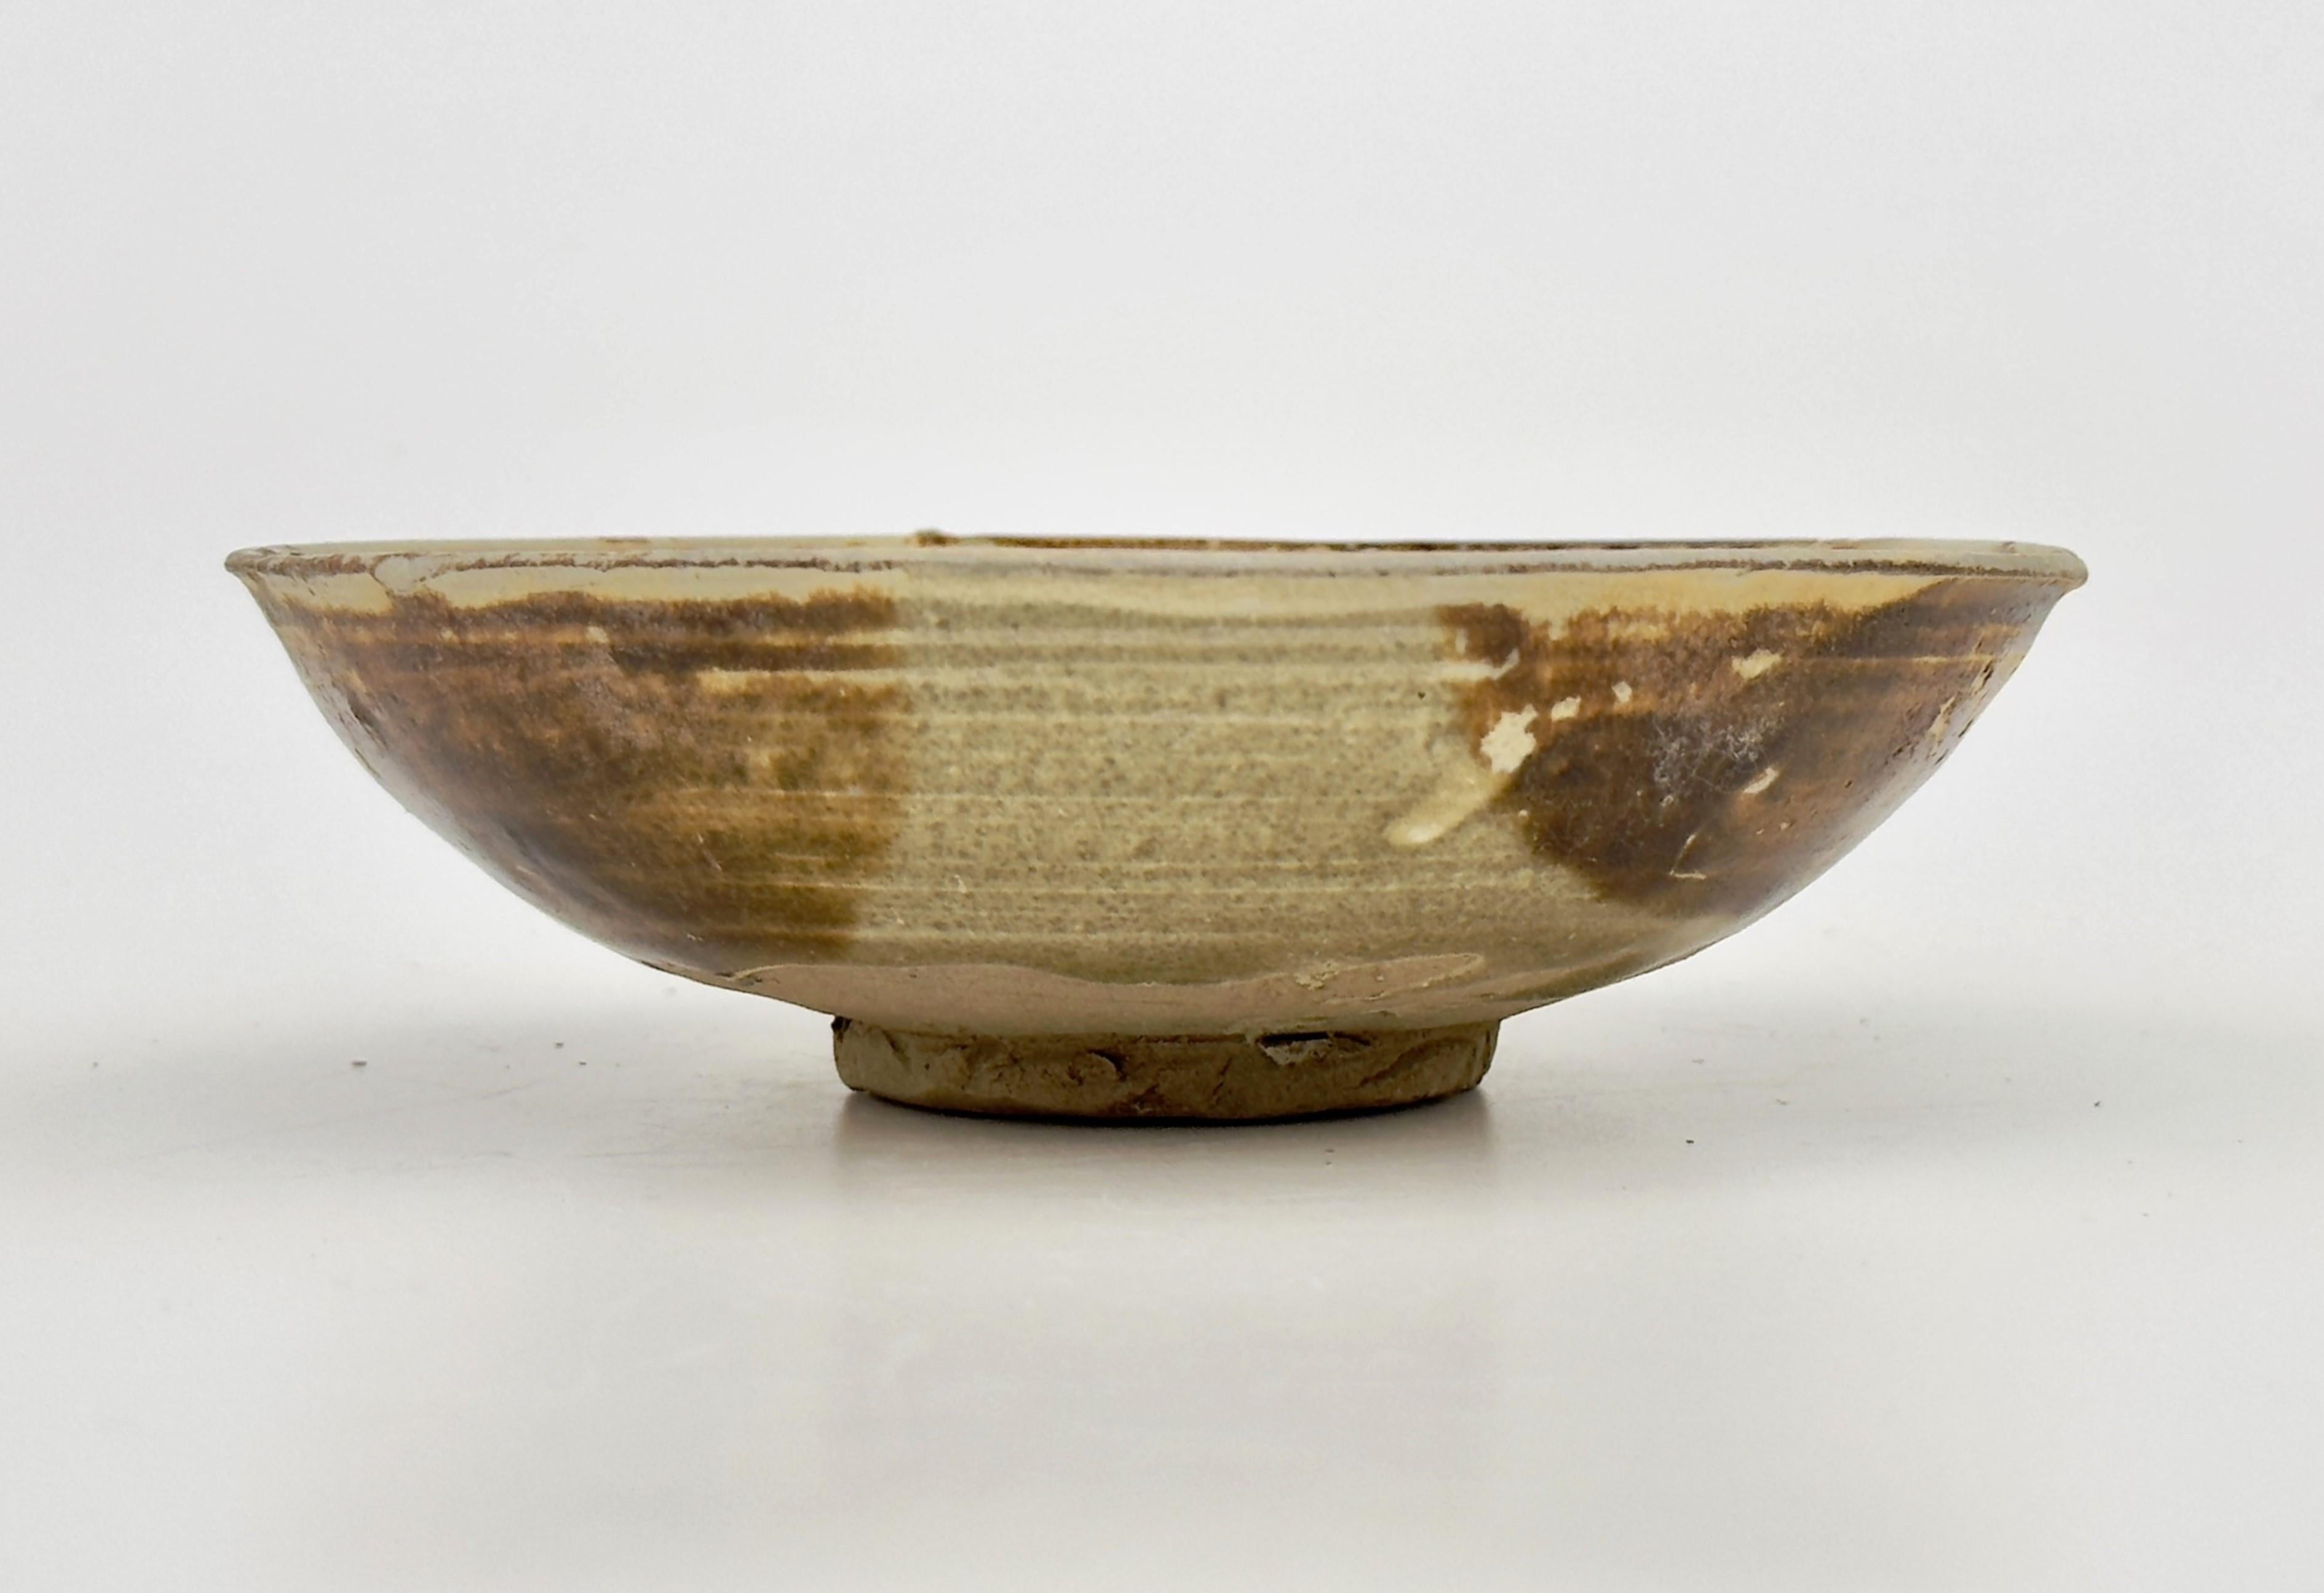 The edges have been dipped in four places with brown, probably iron-oxide. The well of the bowl is freely painted in green and coffee coloured brown.

Period : Late Tang Dynasty
Production Date : Circa 830
Made in : Hunan province
Found/Acquired :